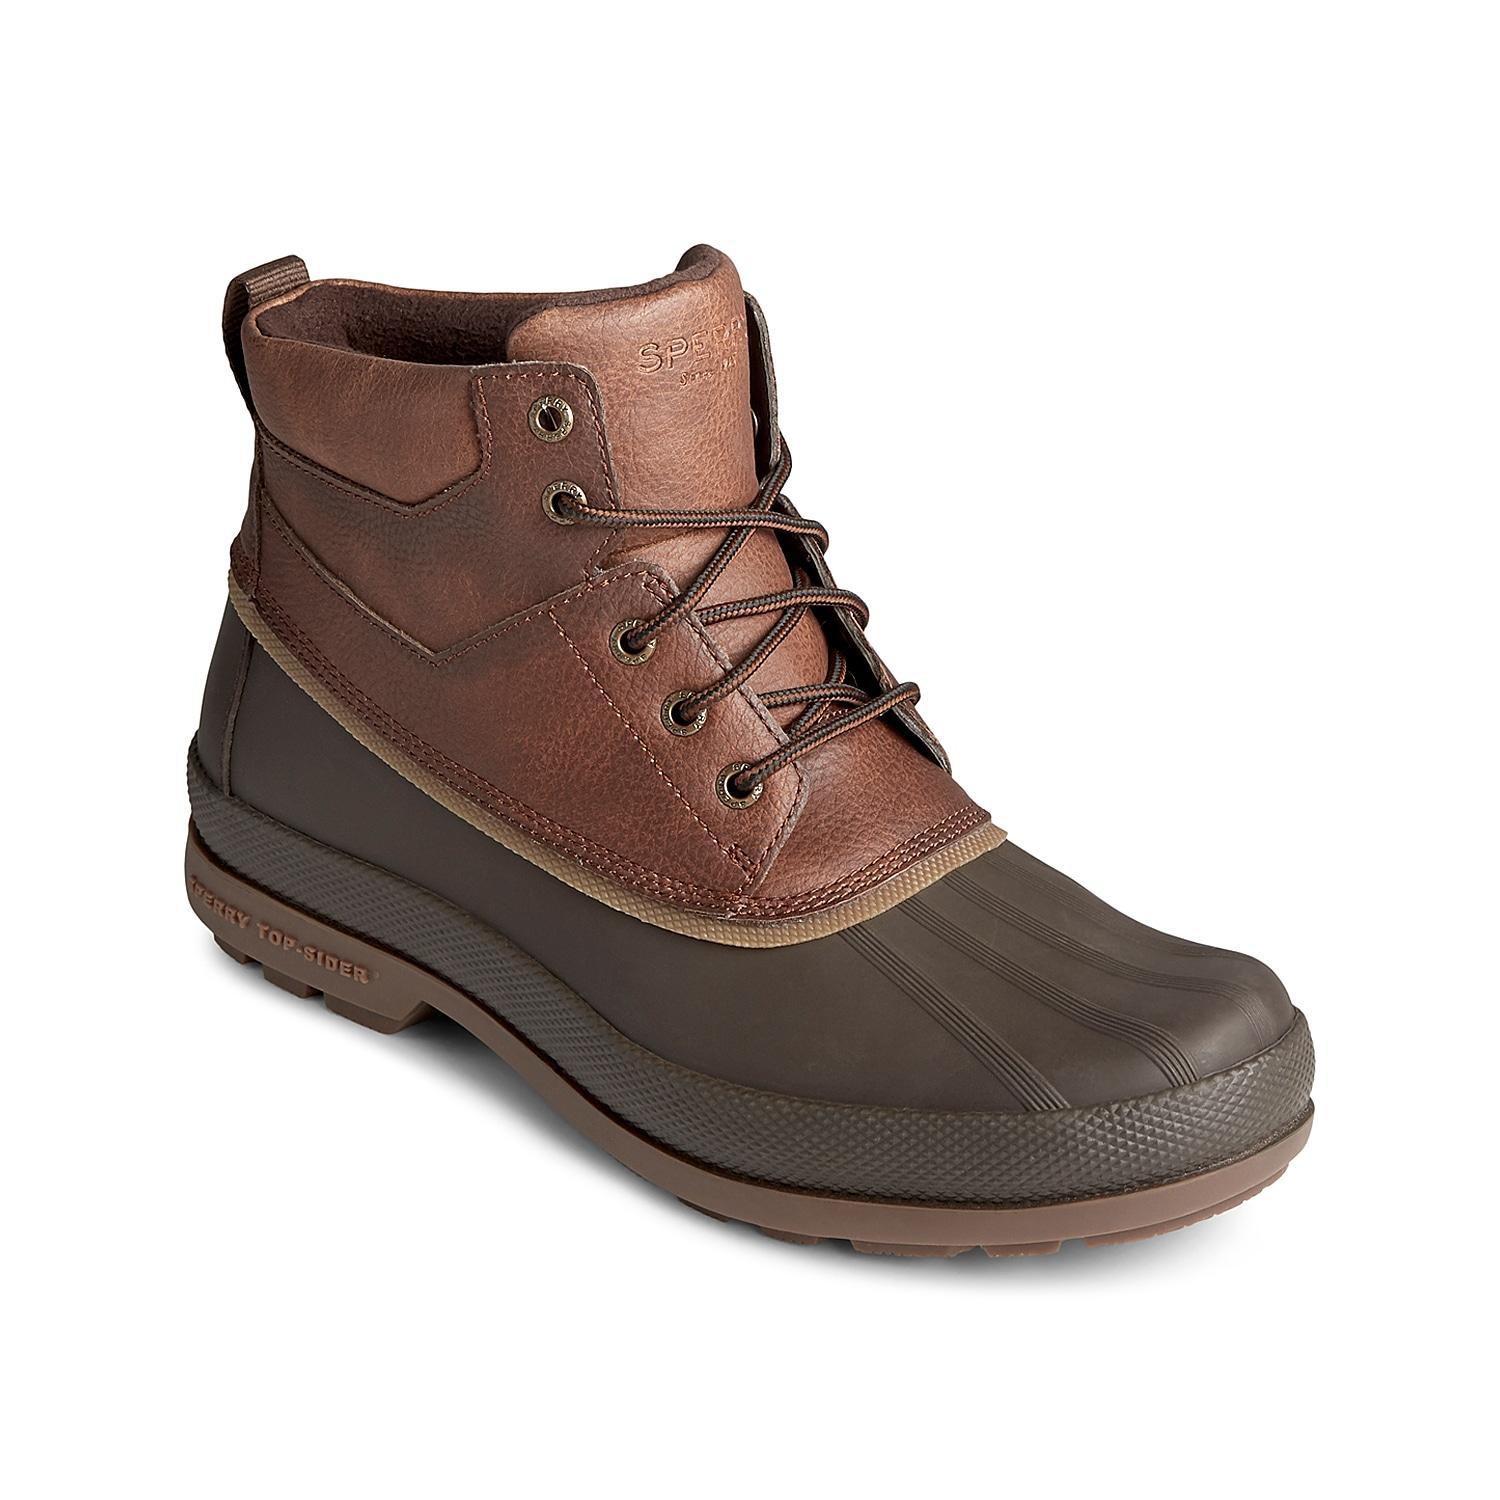 Sperry Cold Bay Snow Boot Product Image